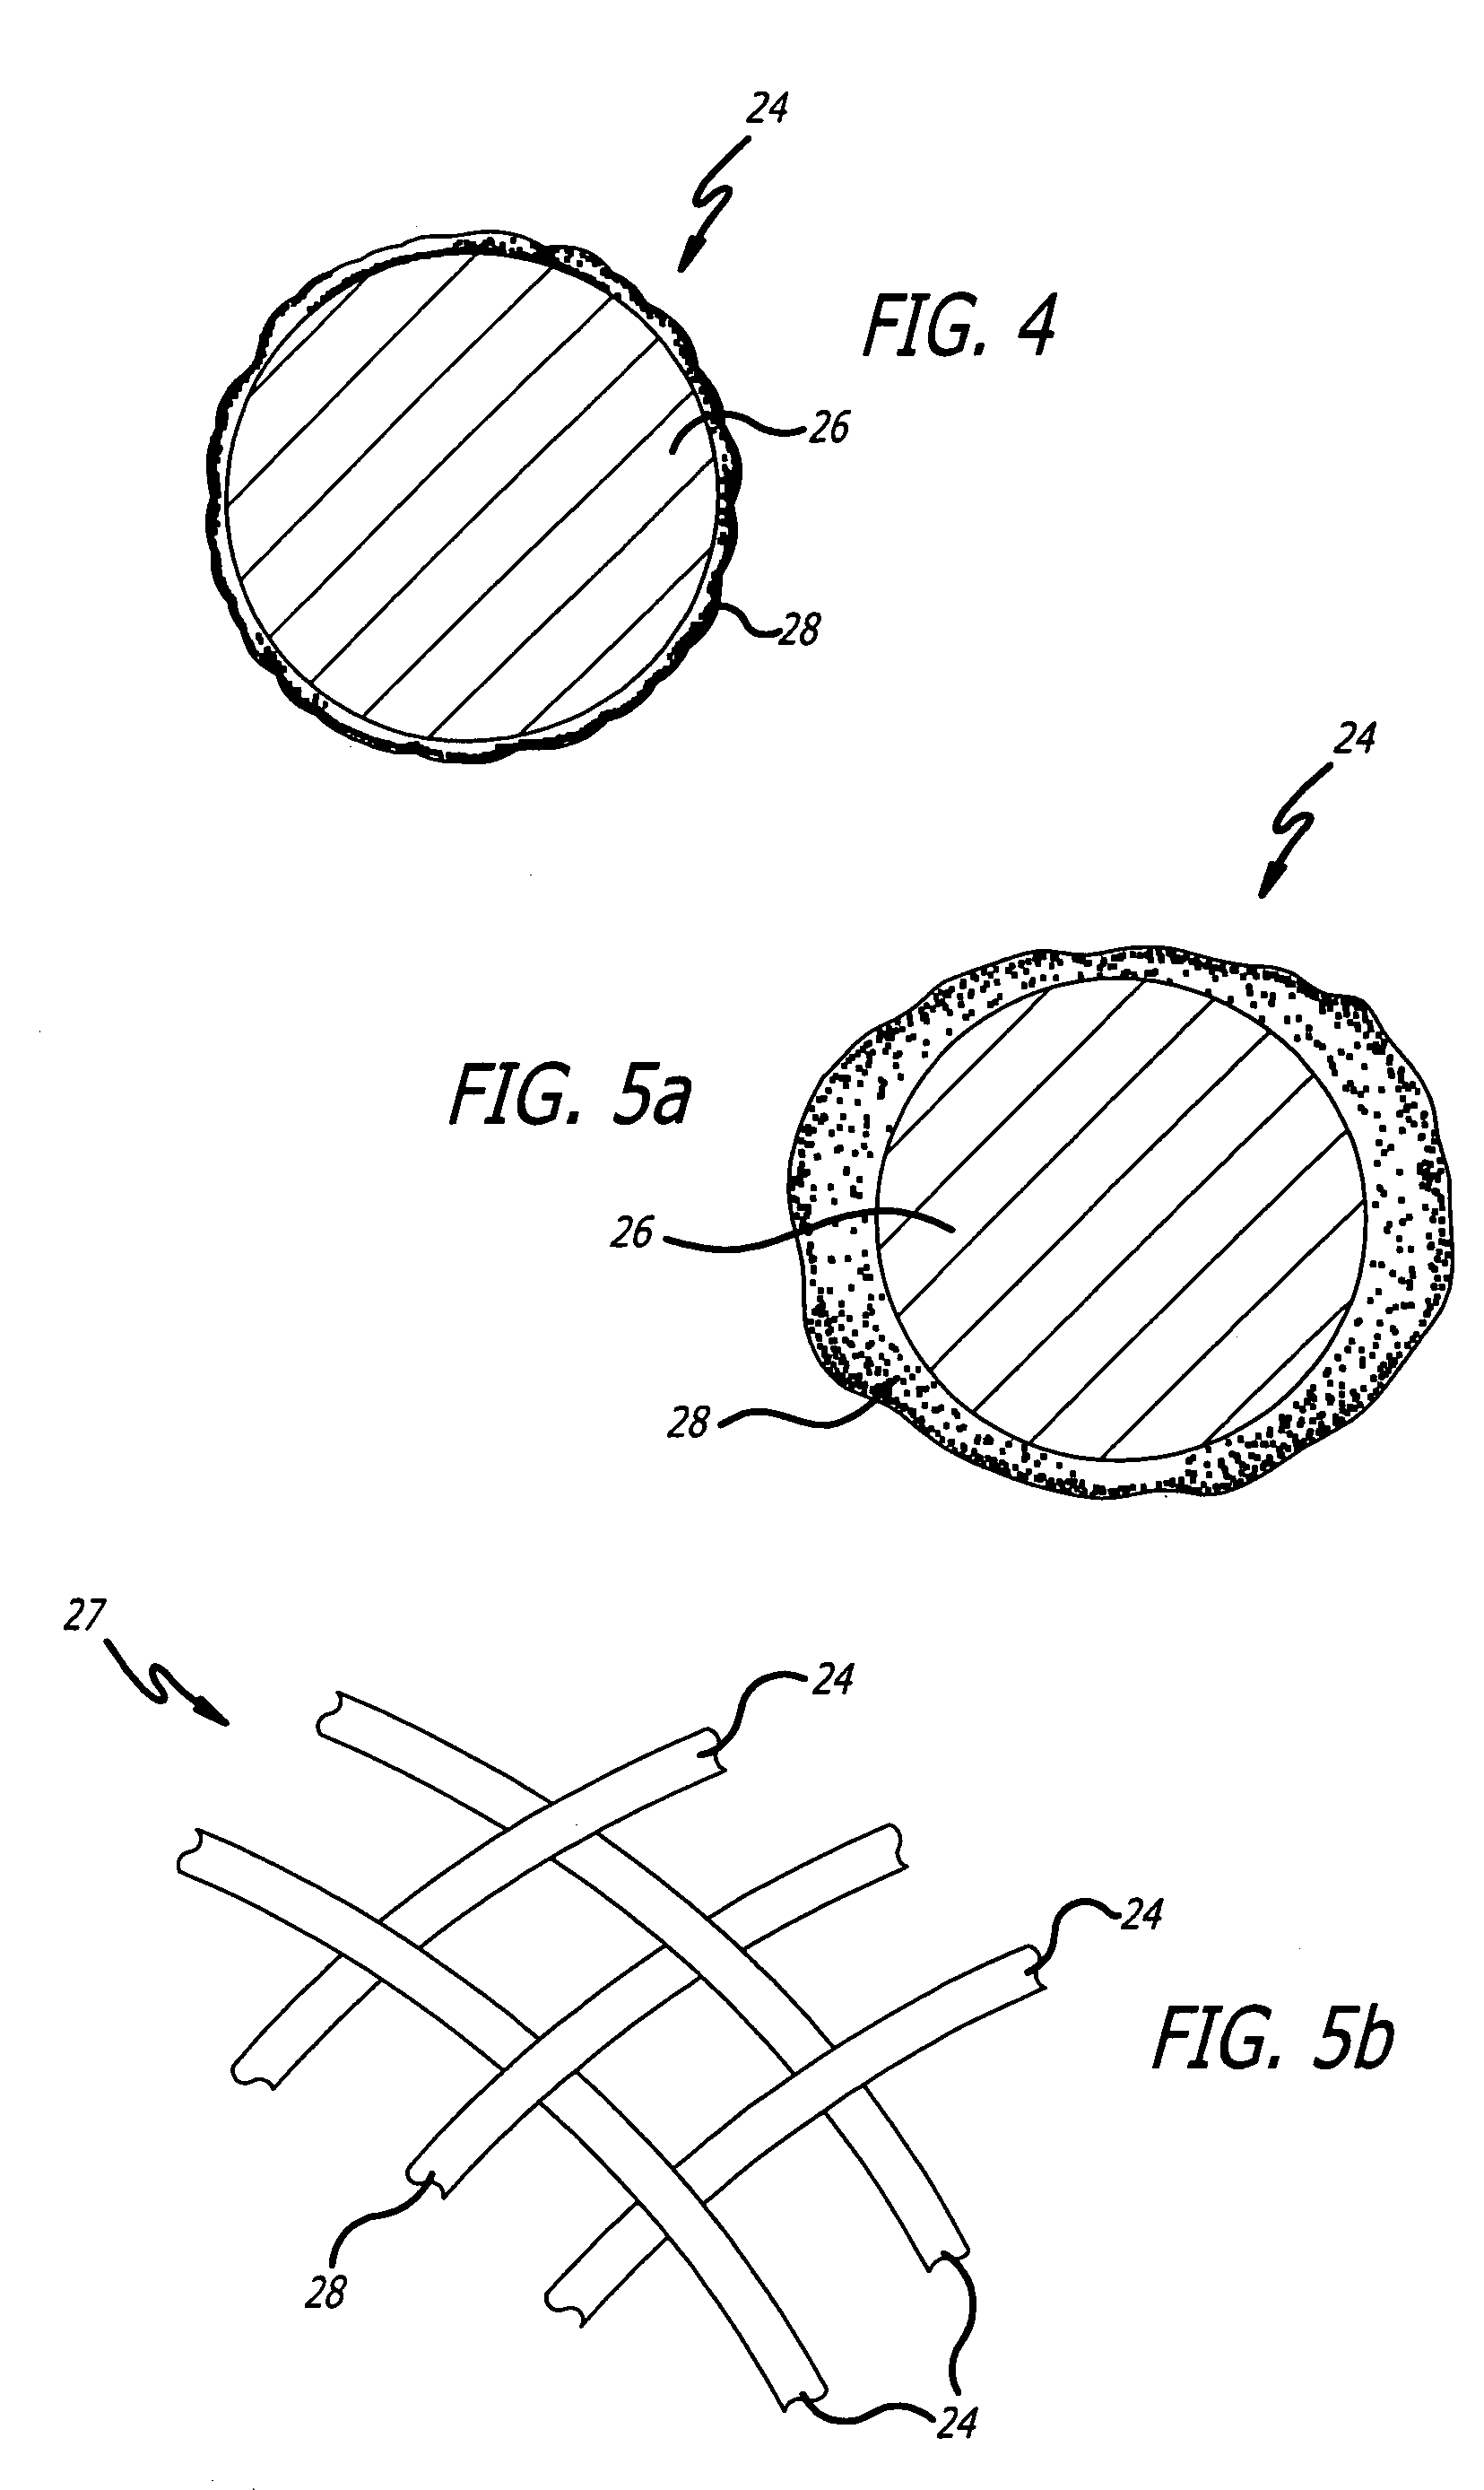 Aneurysm treatment device and method of use